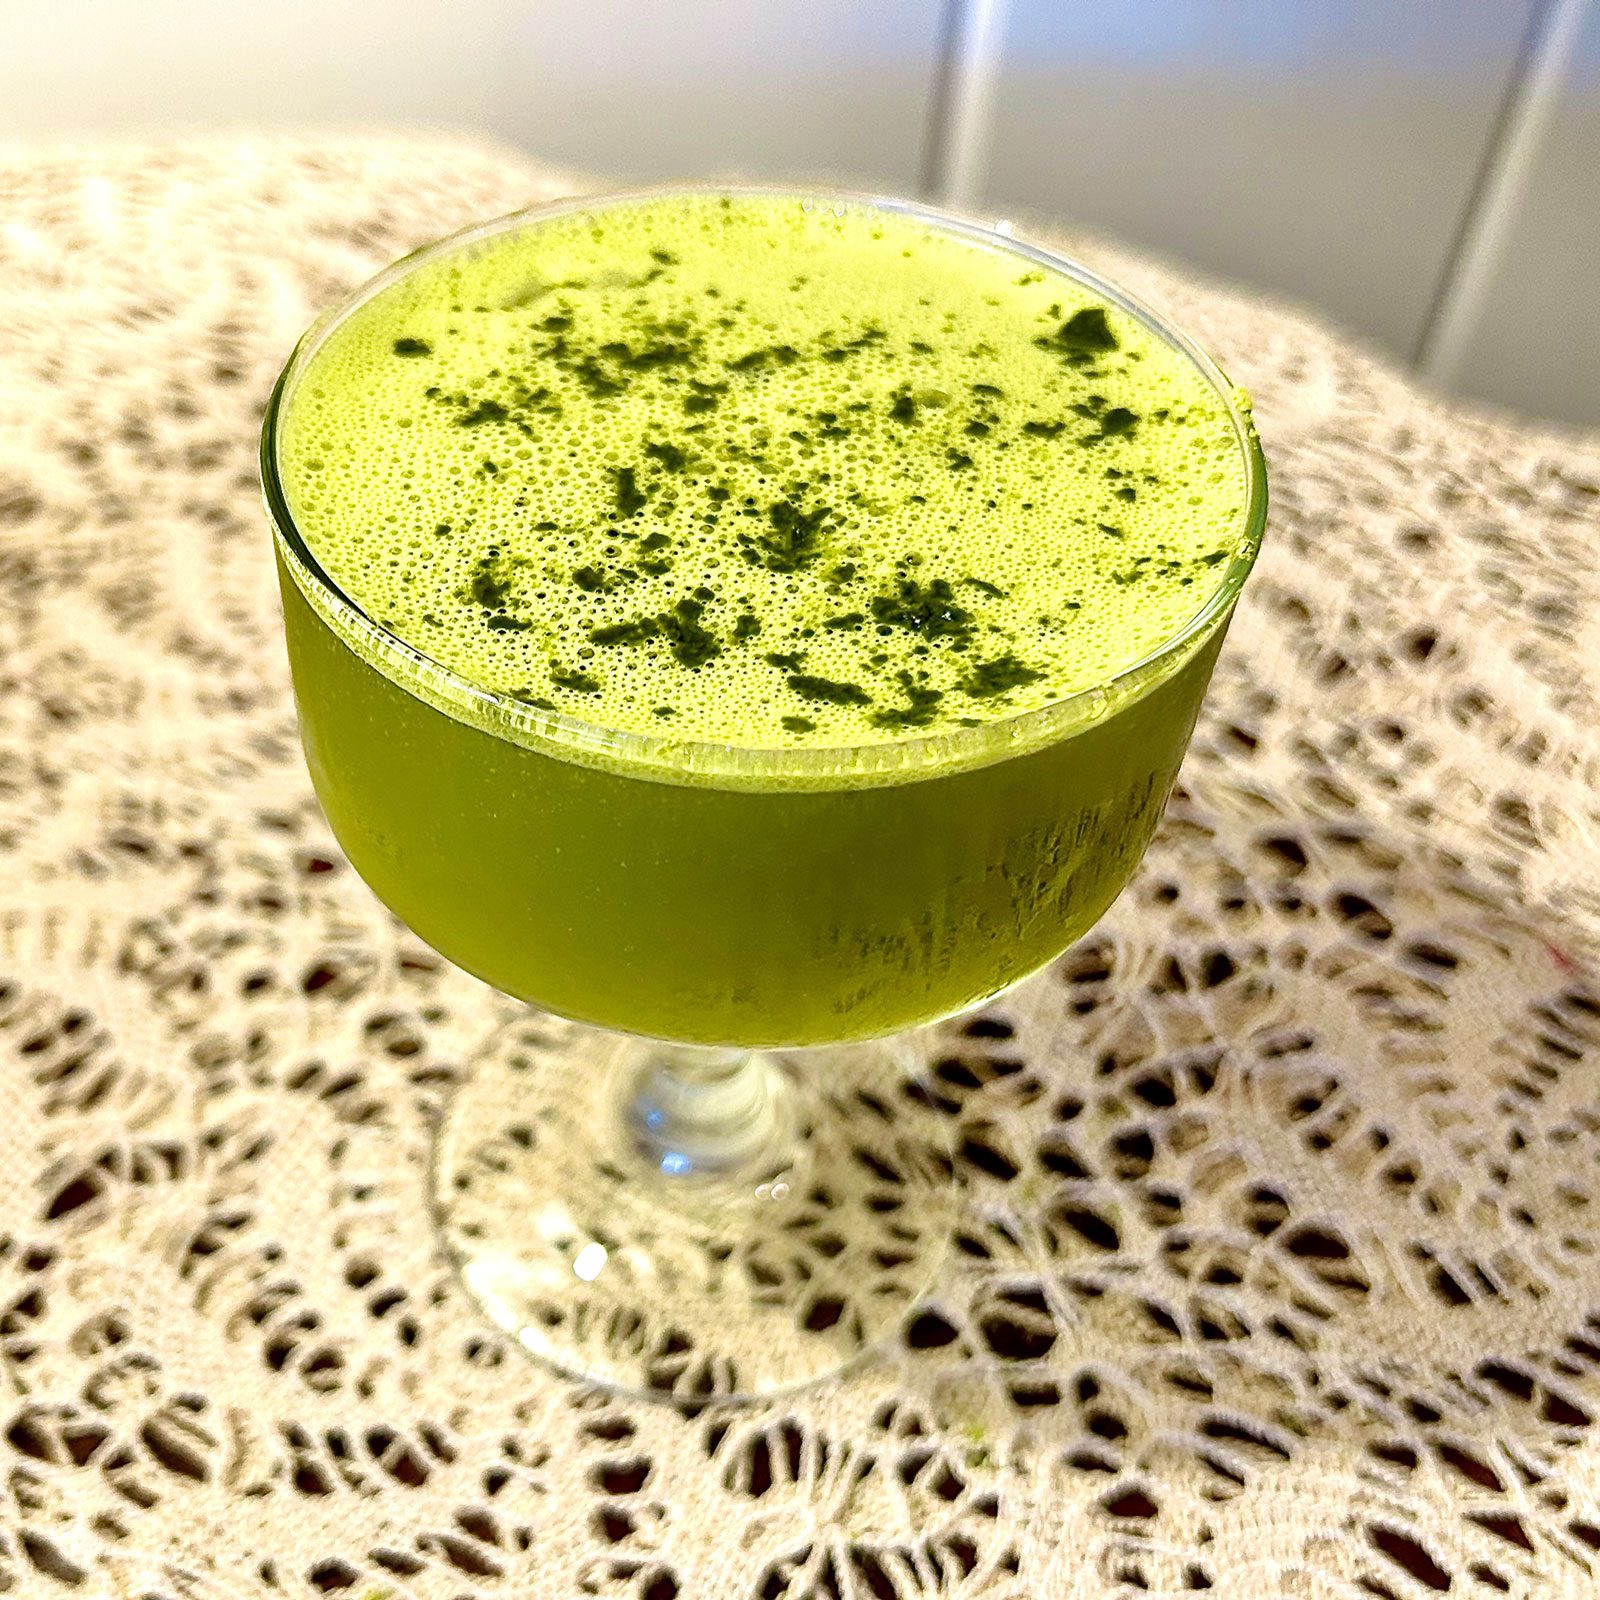 Blender Iced Matcha Latte - The Hint of Rosemary